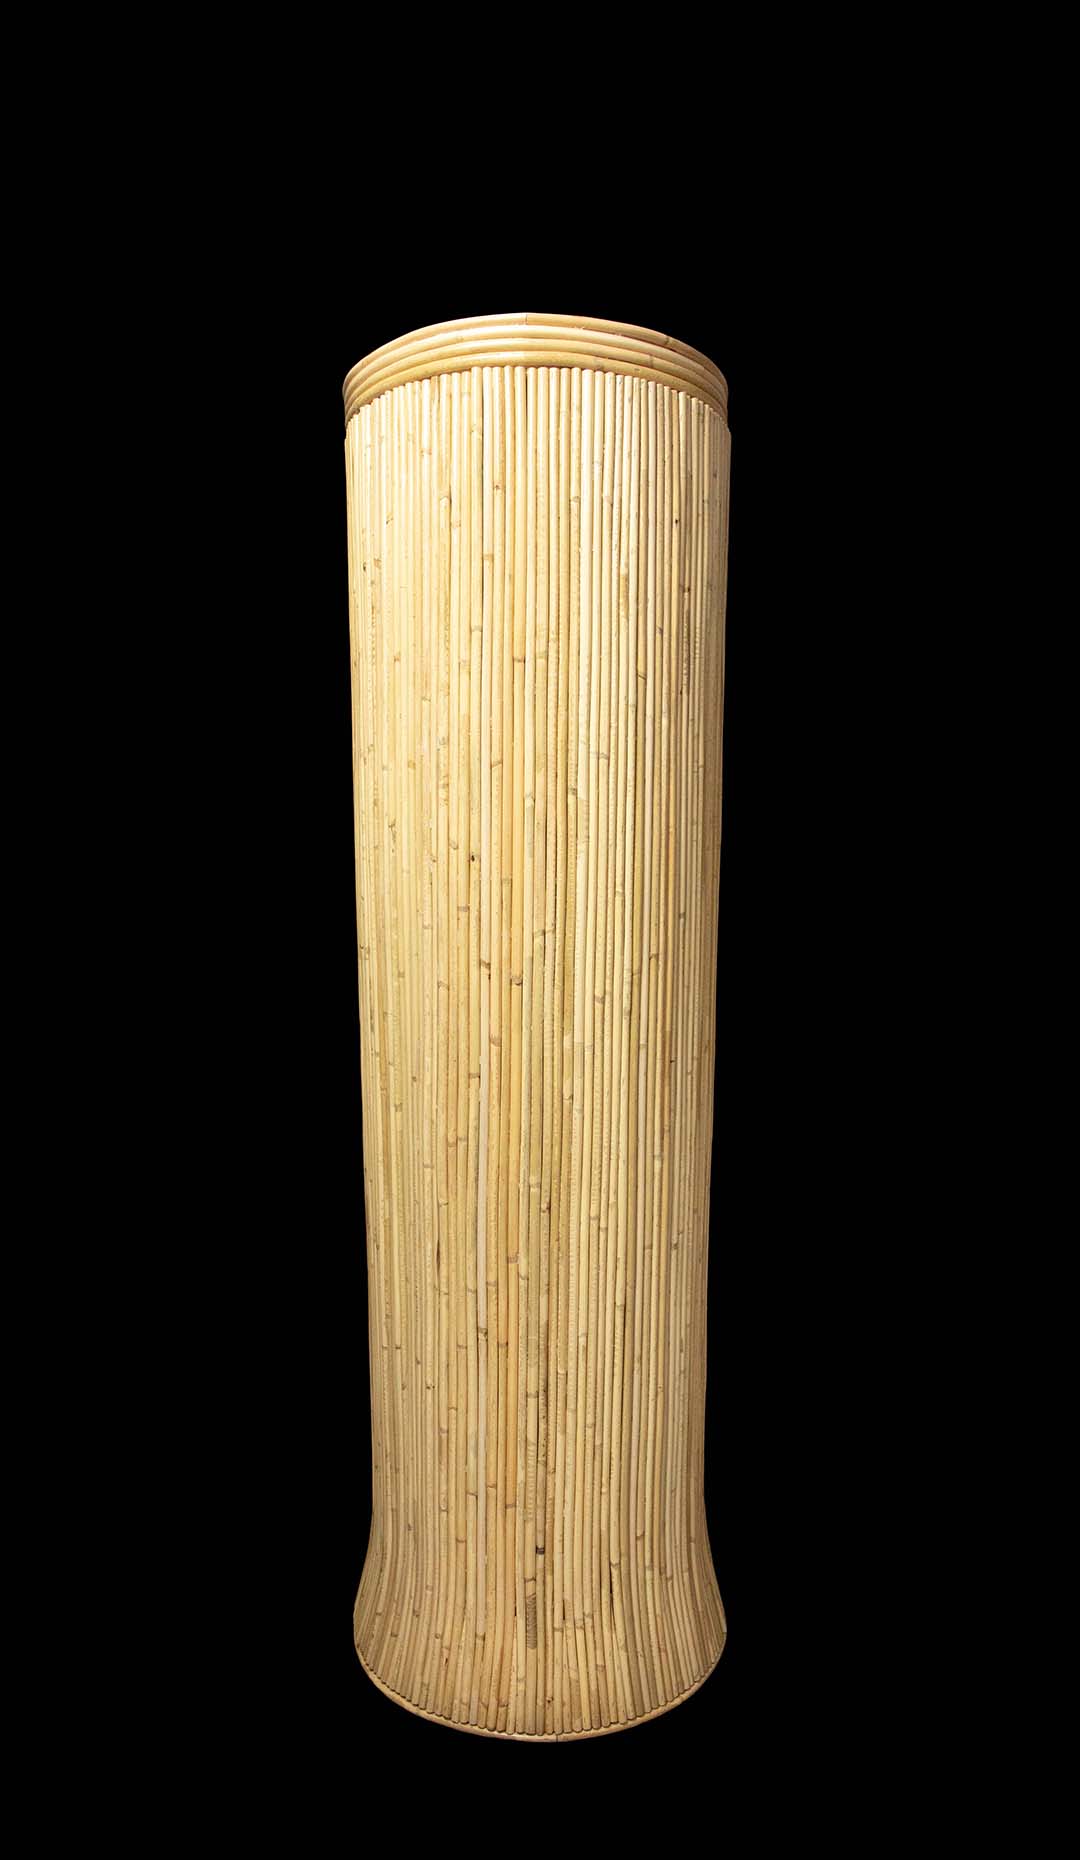 Tall Rattan Pedestal by Creel and Gow